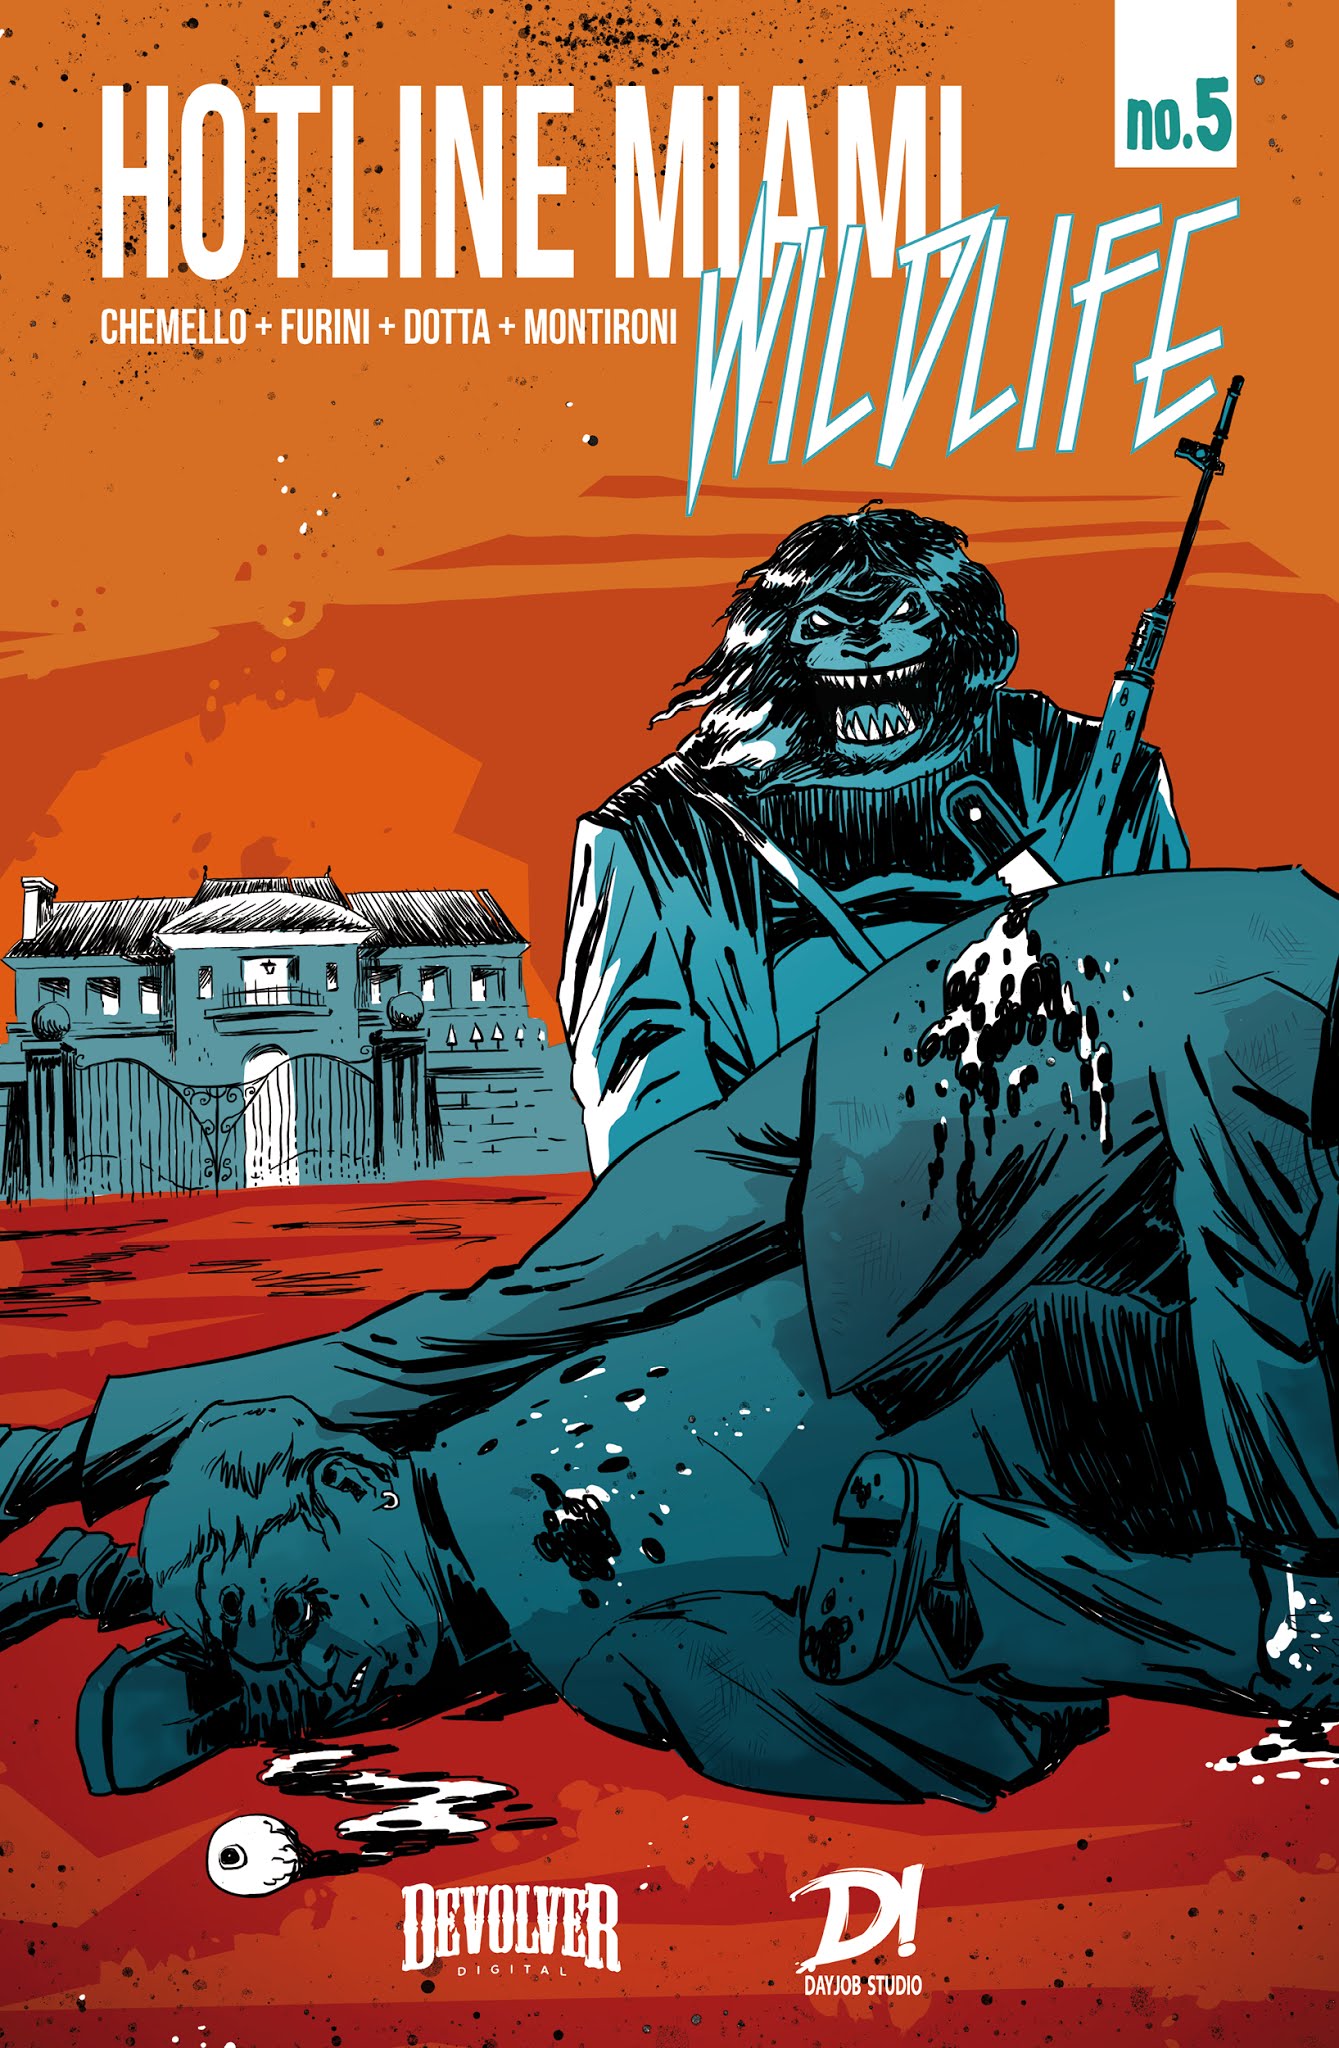 Hotline Miami Wildlife Issue 5 | Read Hotline Miami Wildlife Issue 5 comic  online in high quality. Read Full Comic online for free - Read comics  online in high quality .| READ COMIC ONLINE